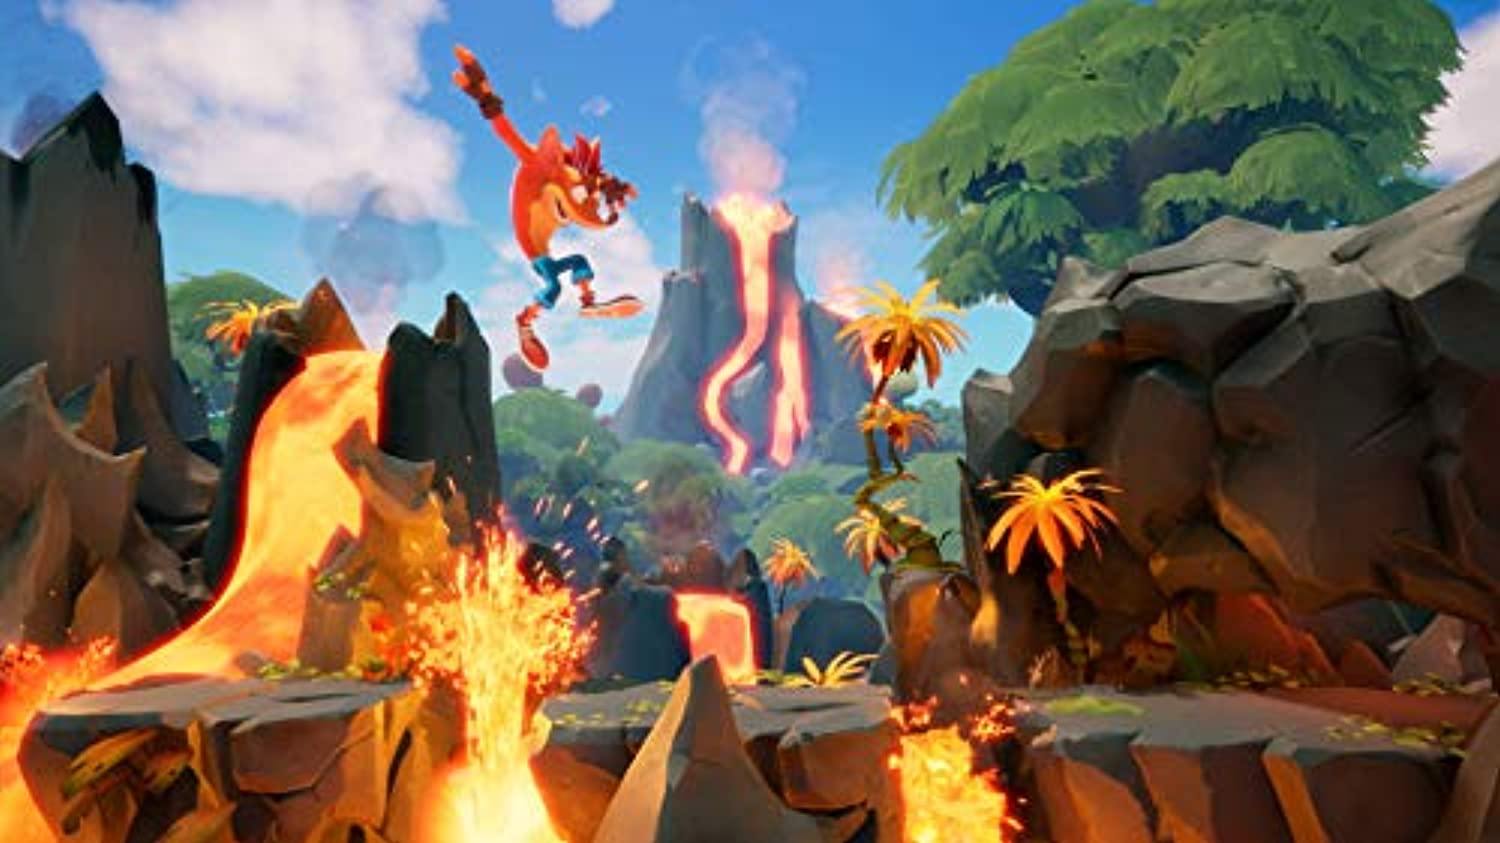 Crash Bandicoot 4: It’s About Time (Xbox One) - Offer Games